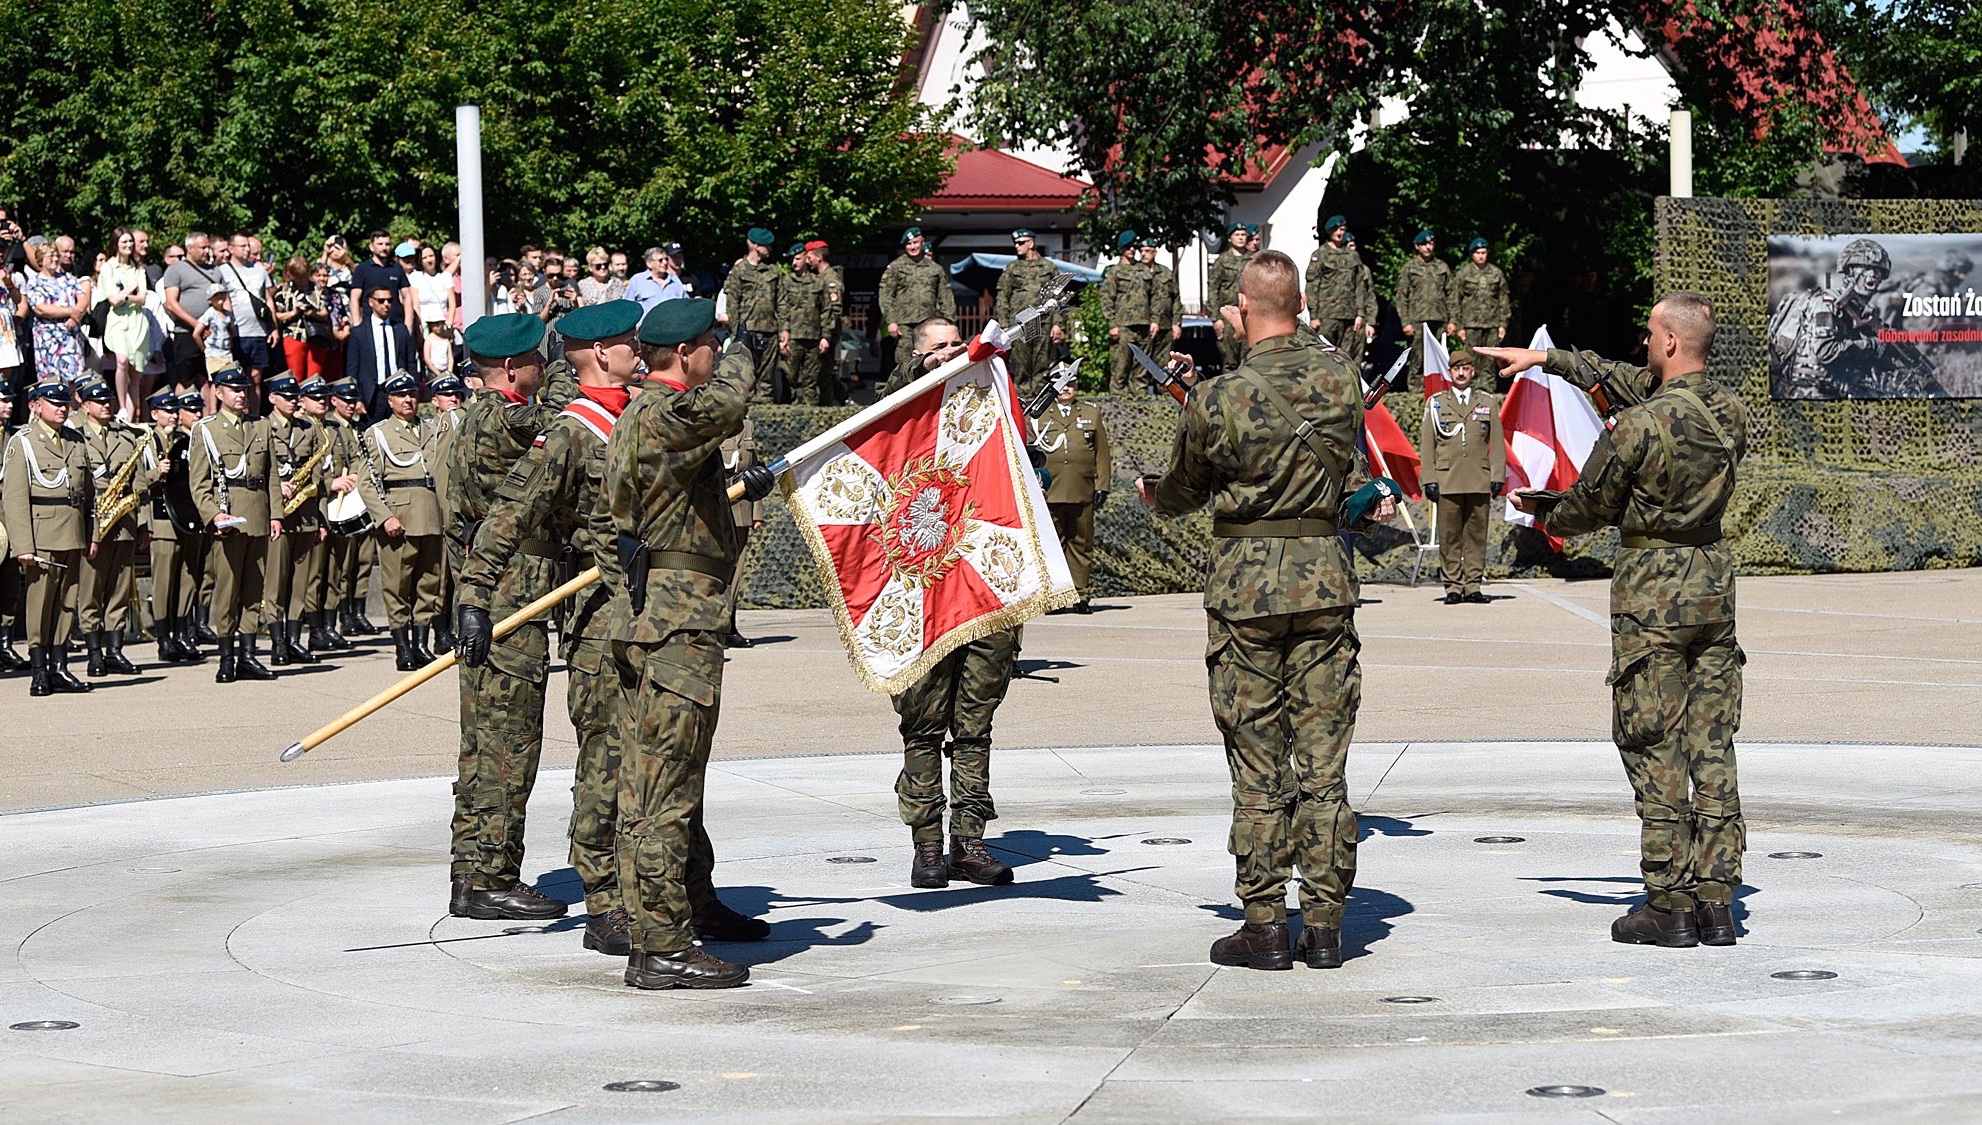 Several thousand Polish soldiers of the new volunteer force sworn in